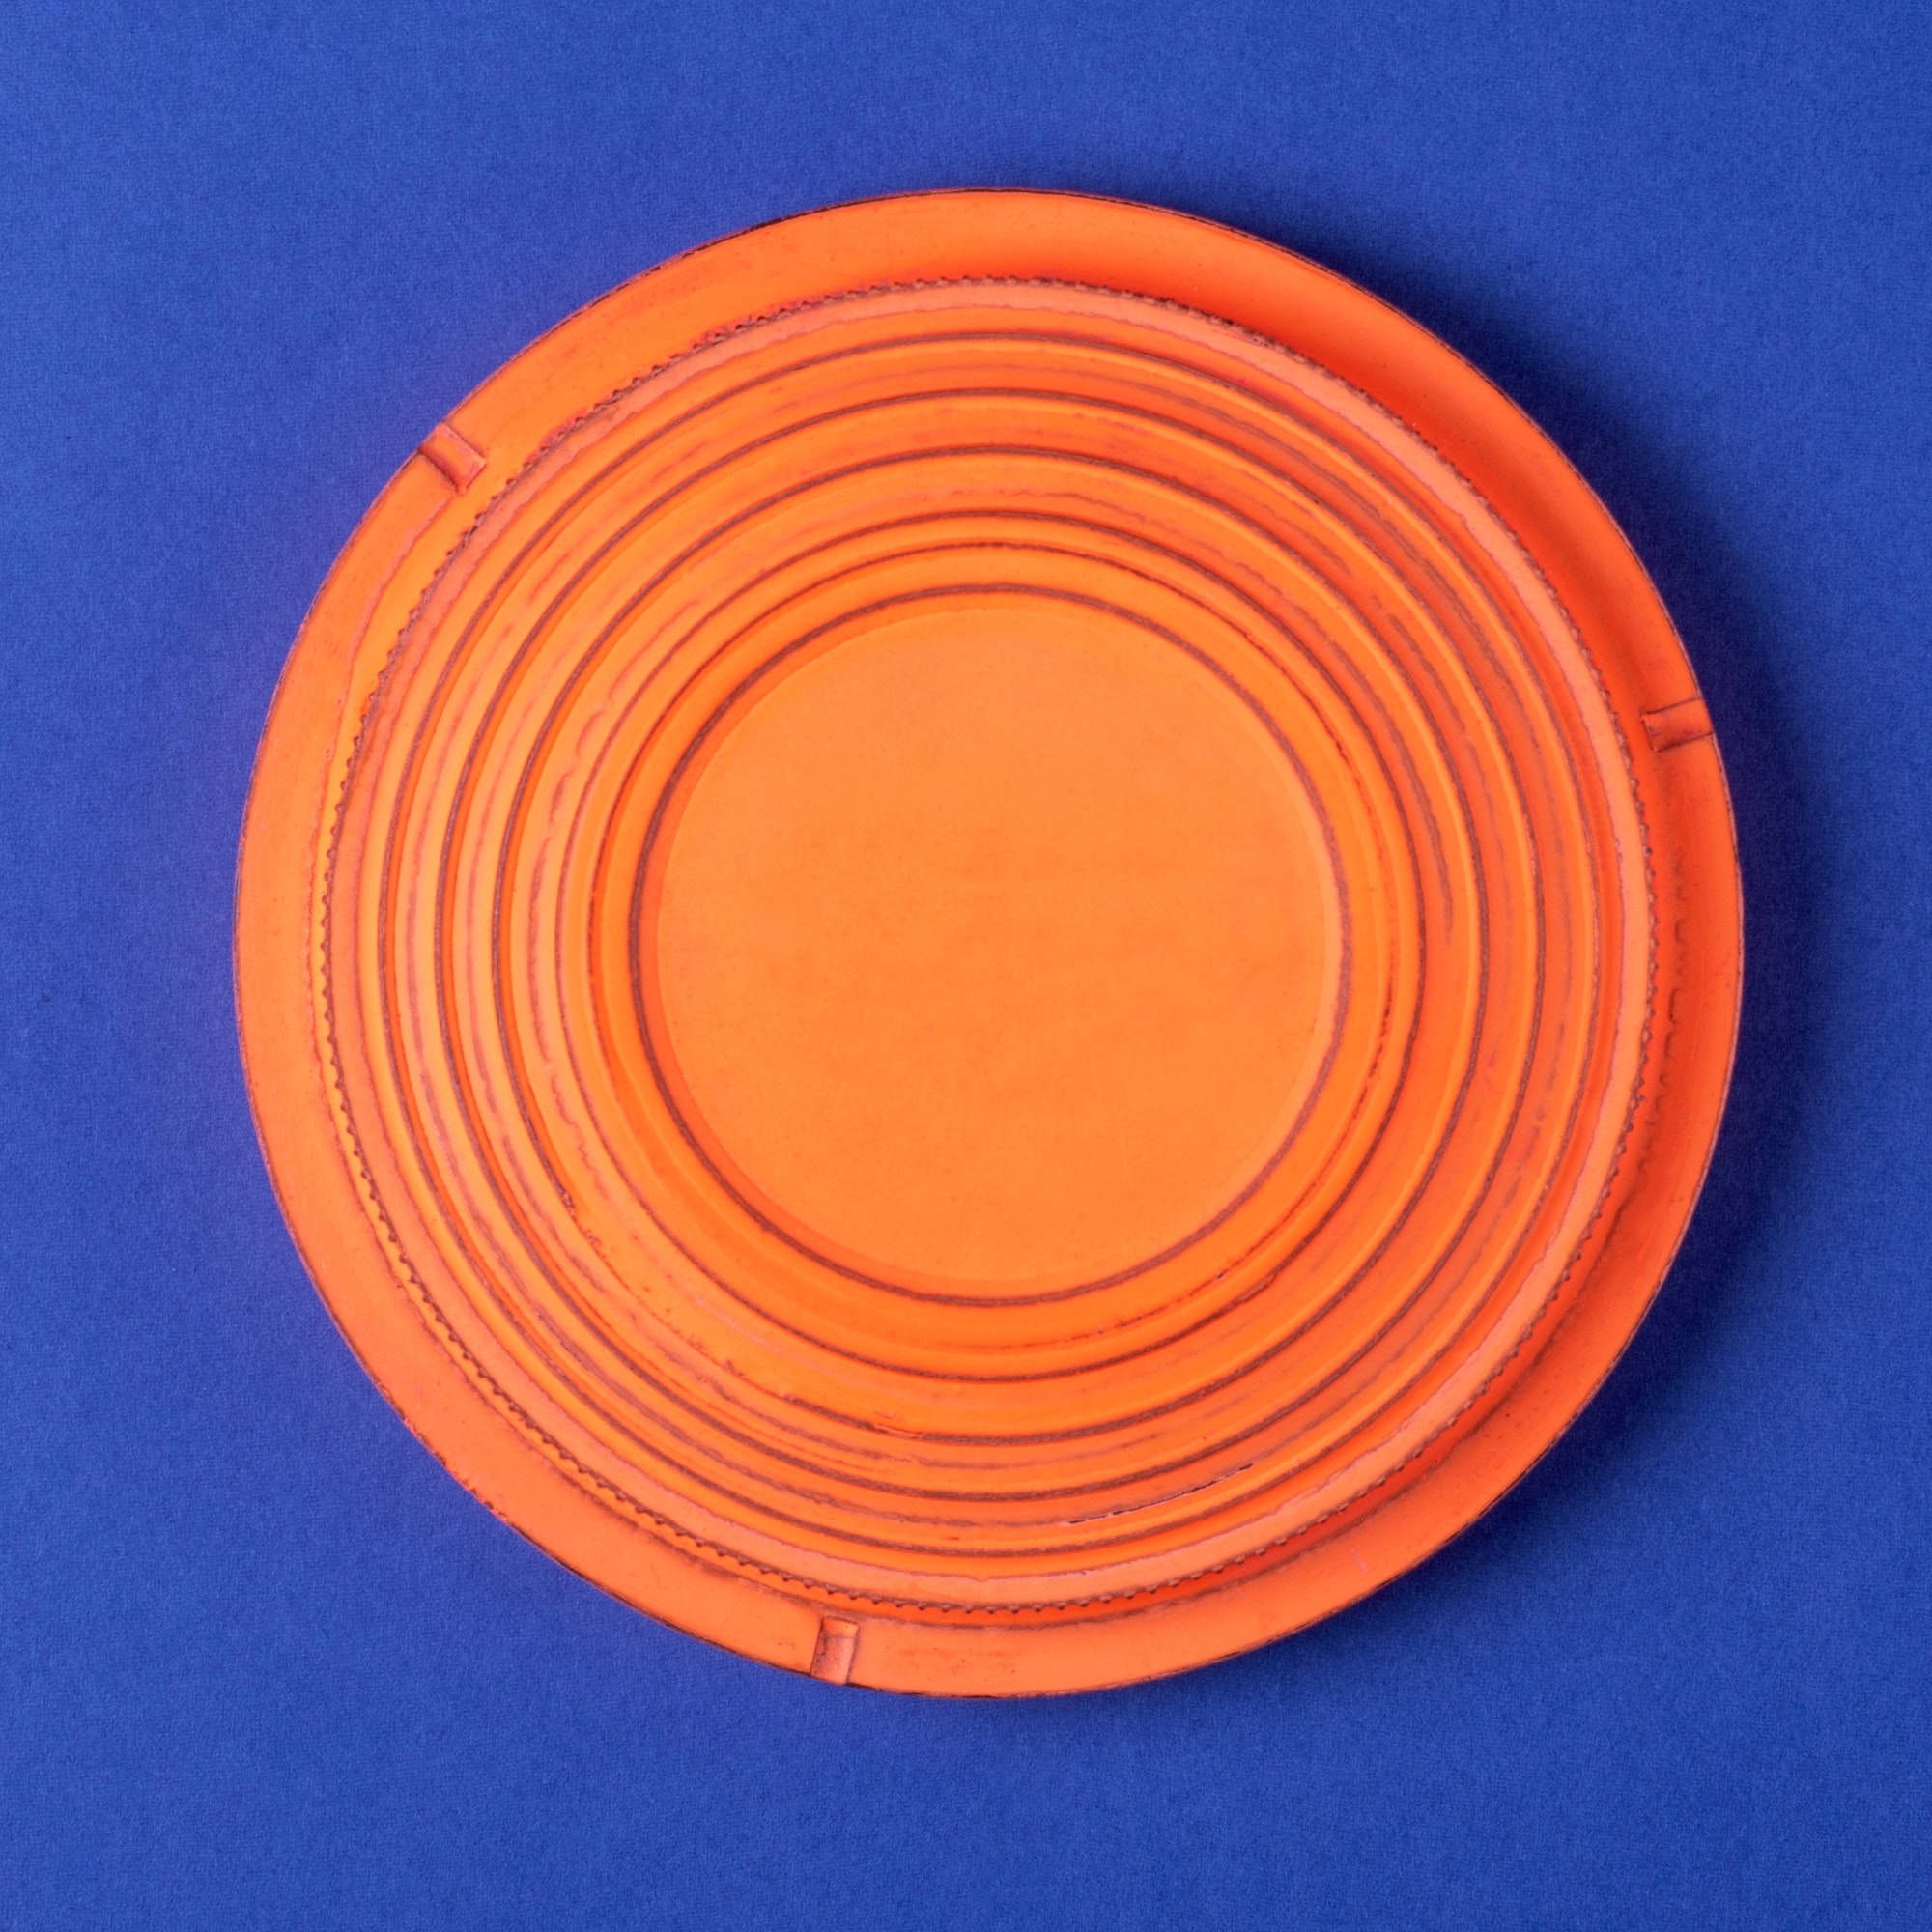 Clay target for skeet shooting against the blue background